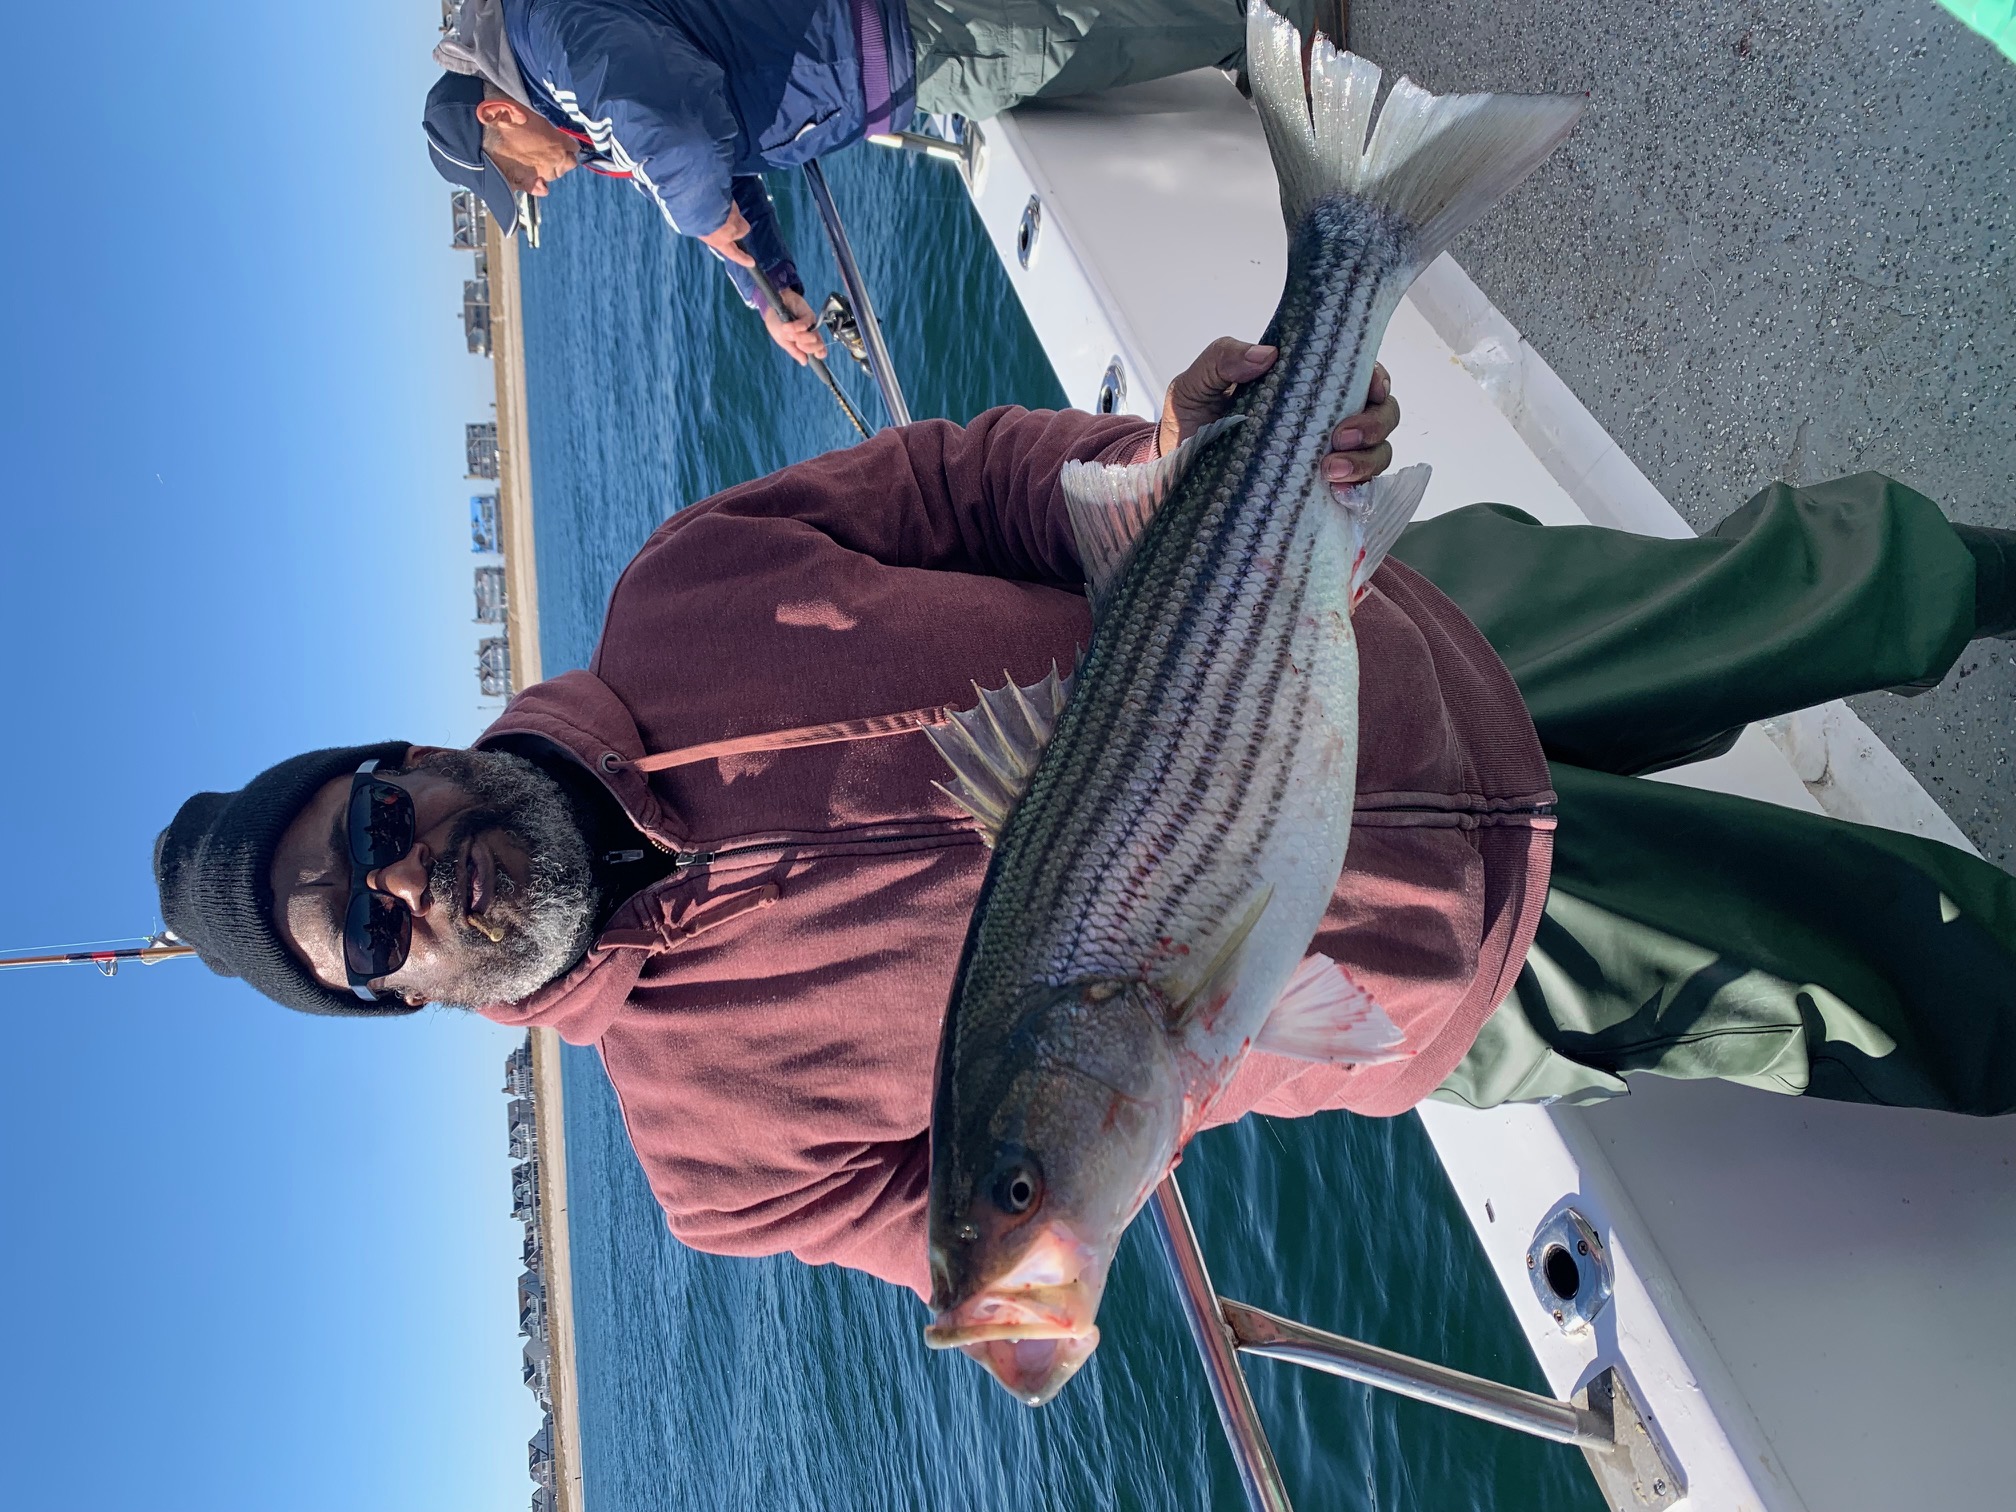 4 striped bass fishing books will separate